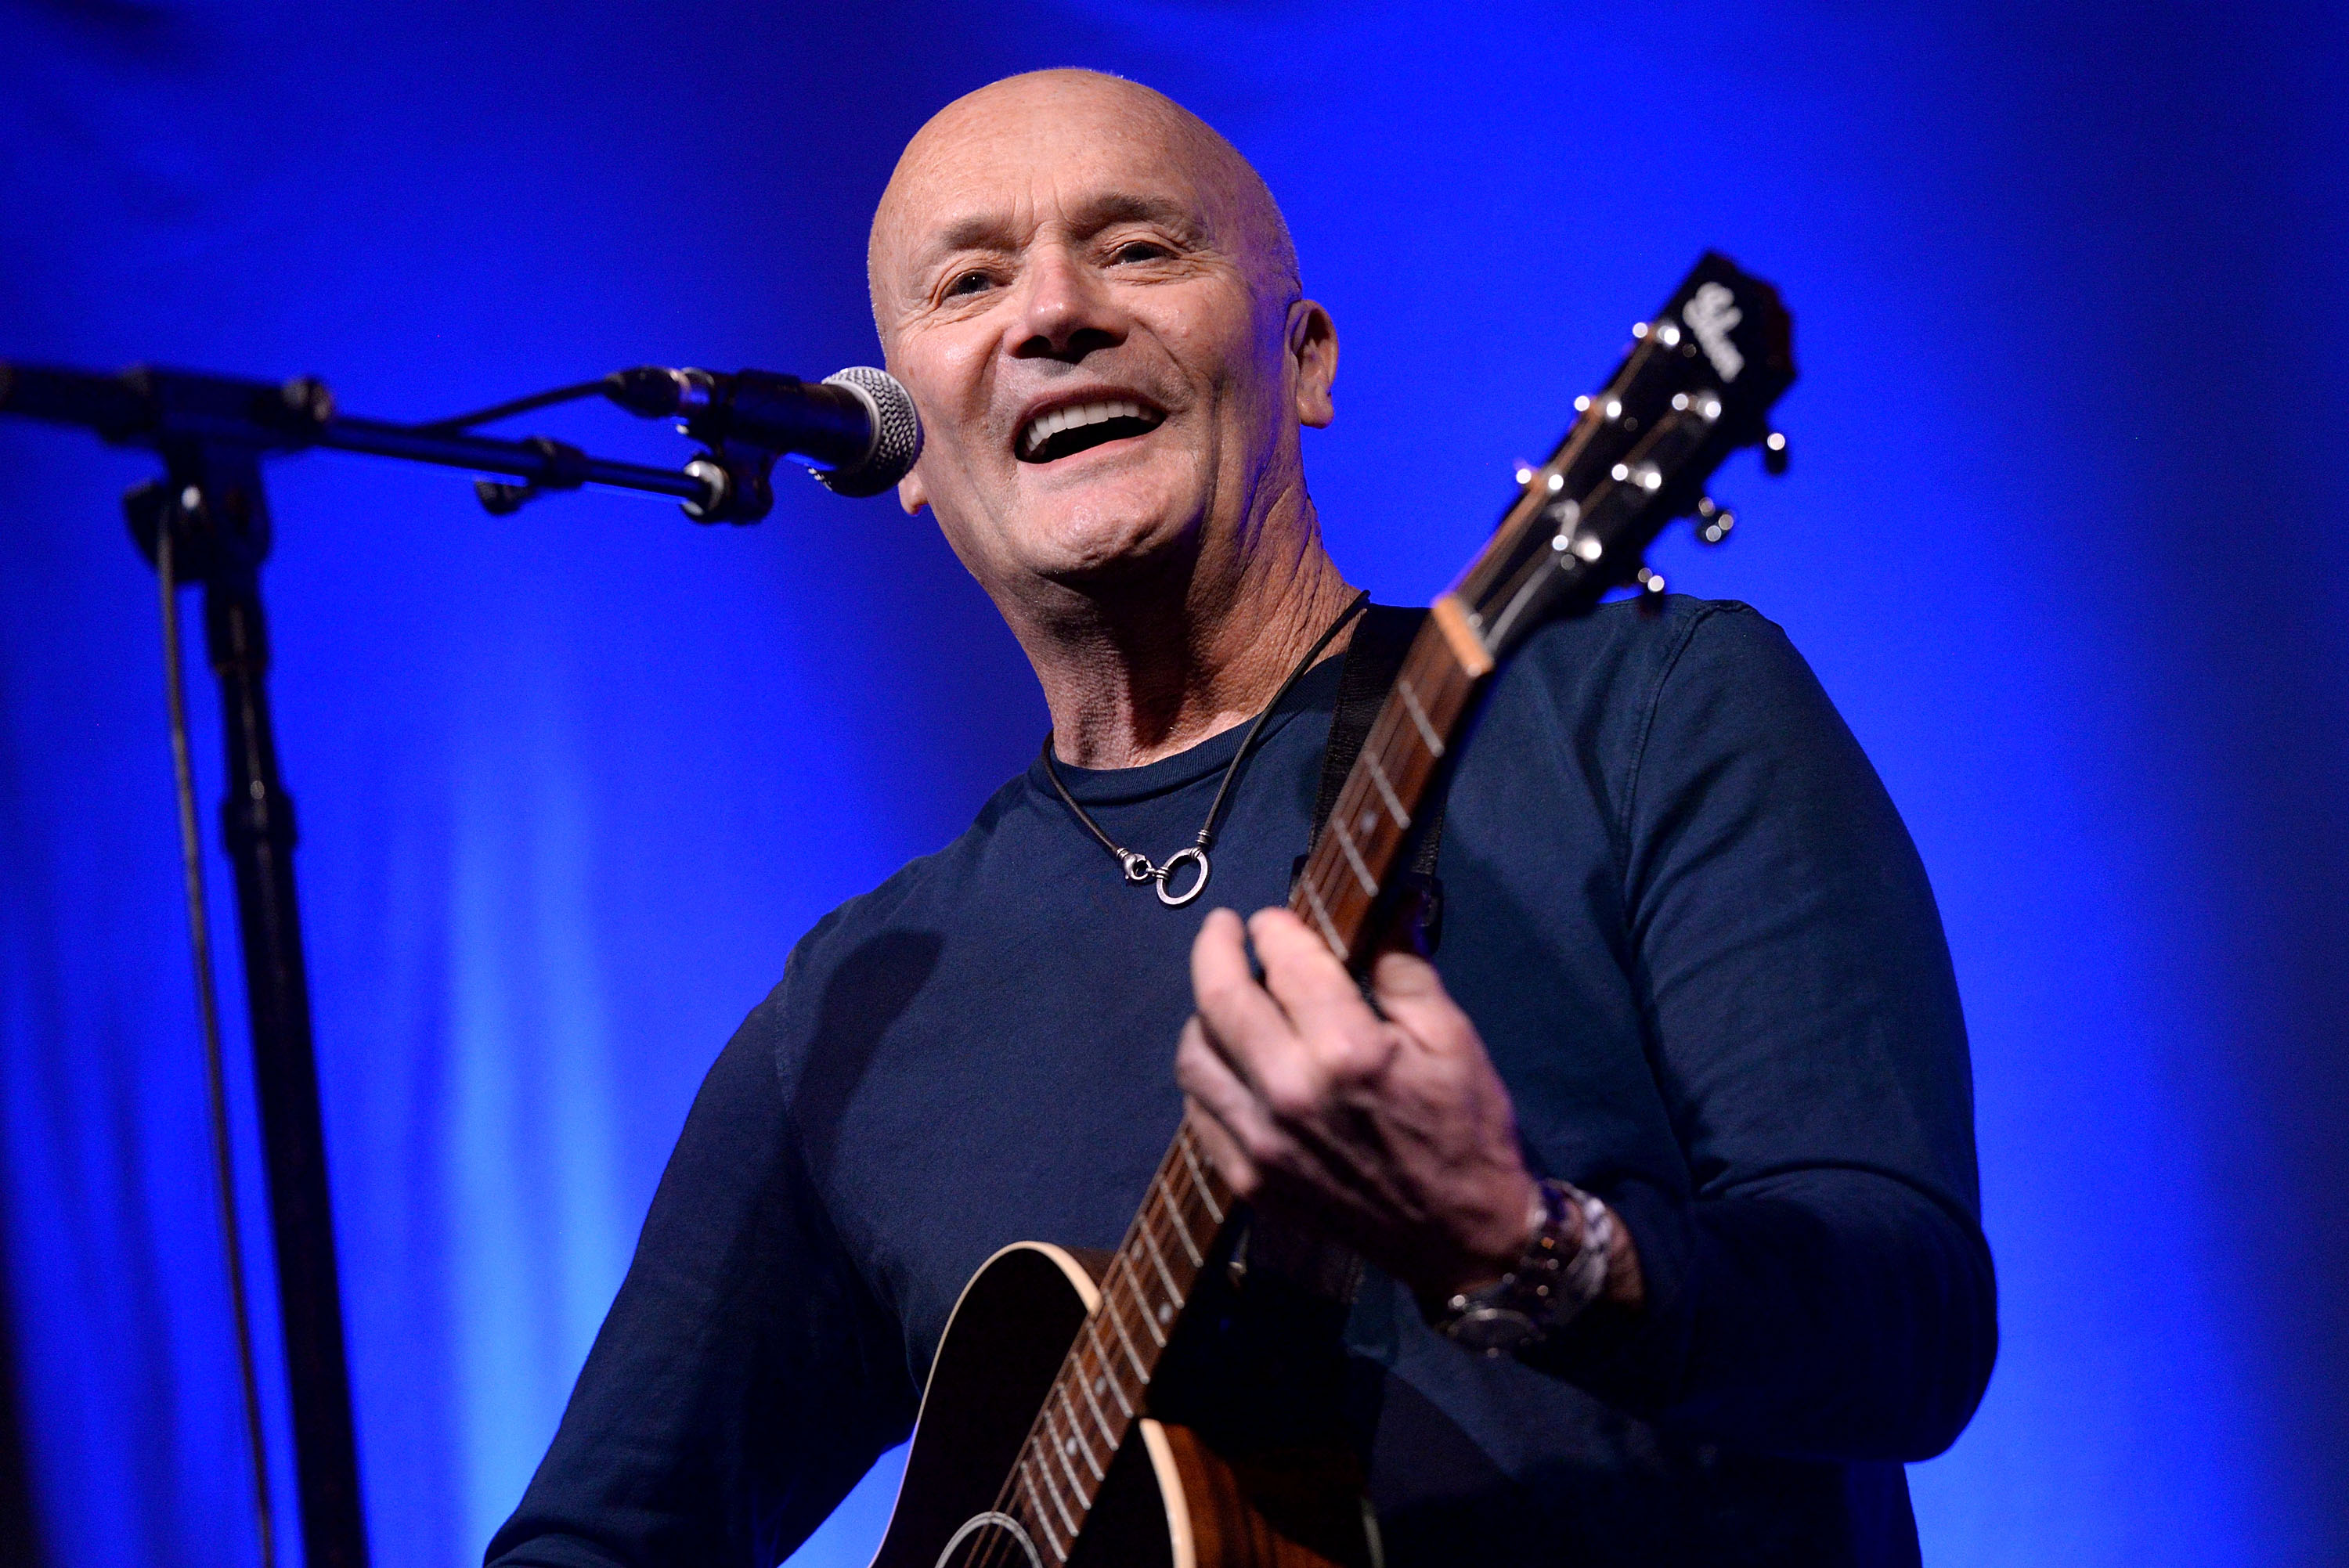 'The Office' star Creed Bratton, a former member of The Grass Roots, with a guitar on a stage